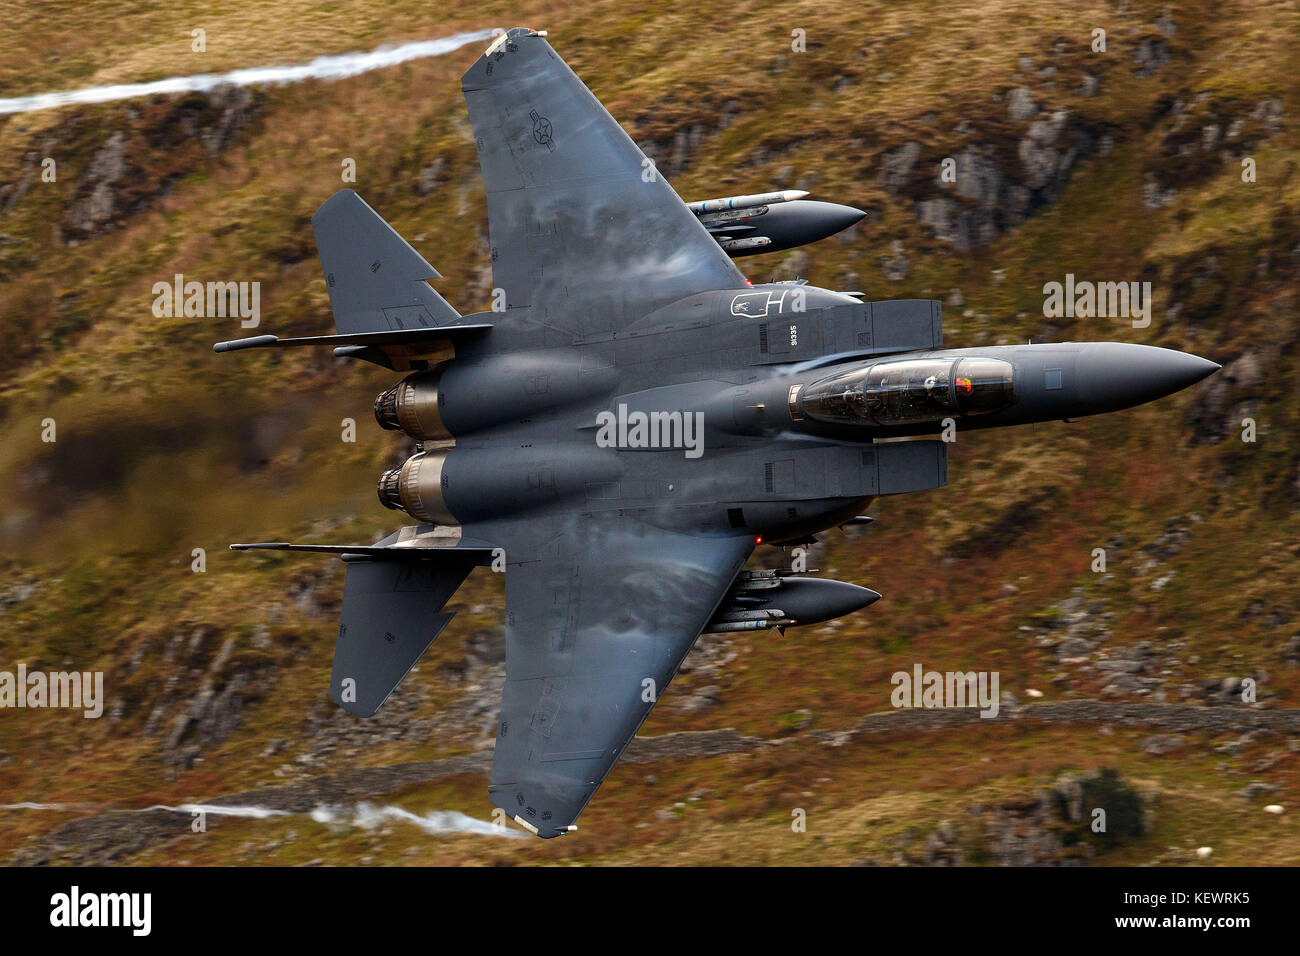 United States Air Force McDonnell-Douglas F-15E Strike Eagle (LN 91-335) from the 48th Fighter Wing, 494th Fighter Squadron based at RAF Lakenheath, England, flies low level through the Mach Loop, Machynlleth, Wales, United Kingdom Stock Photo